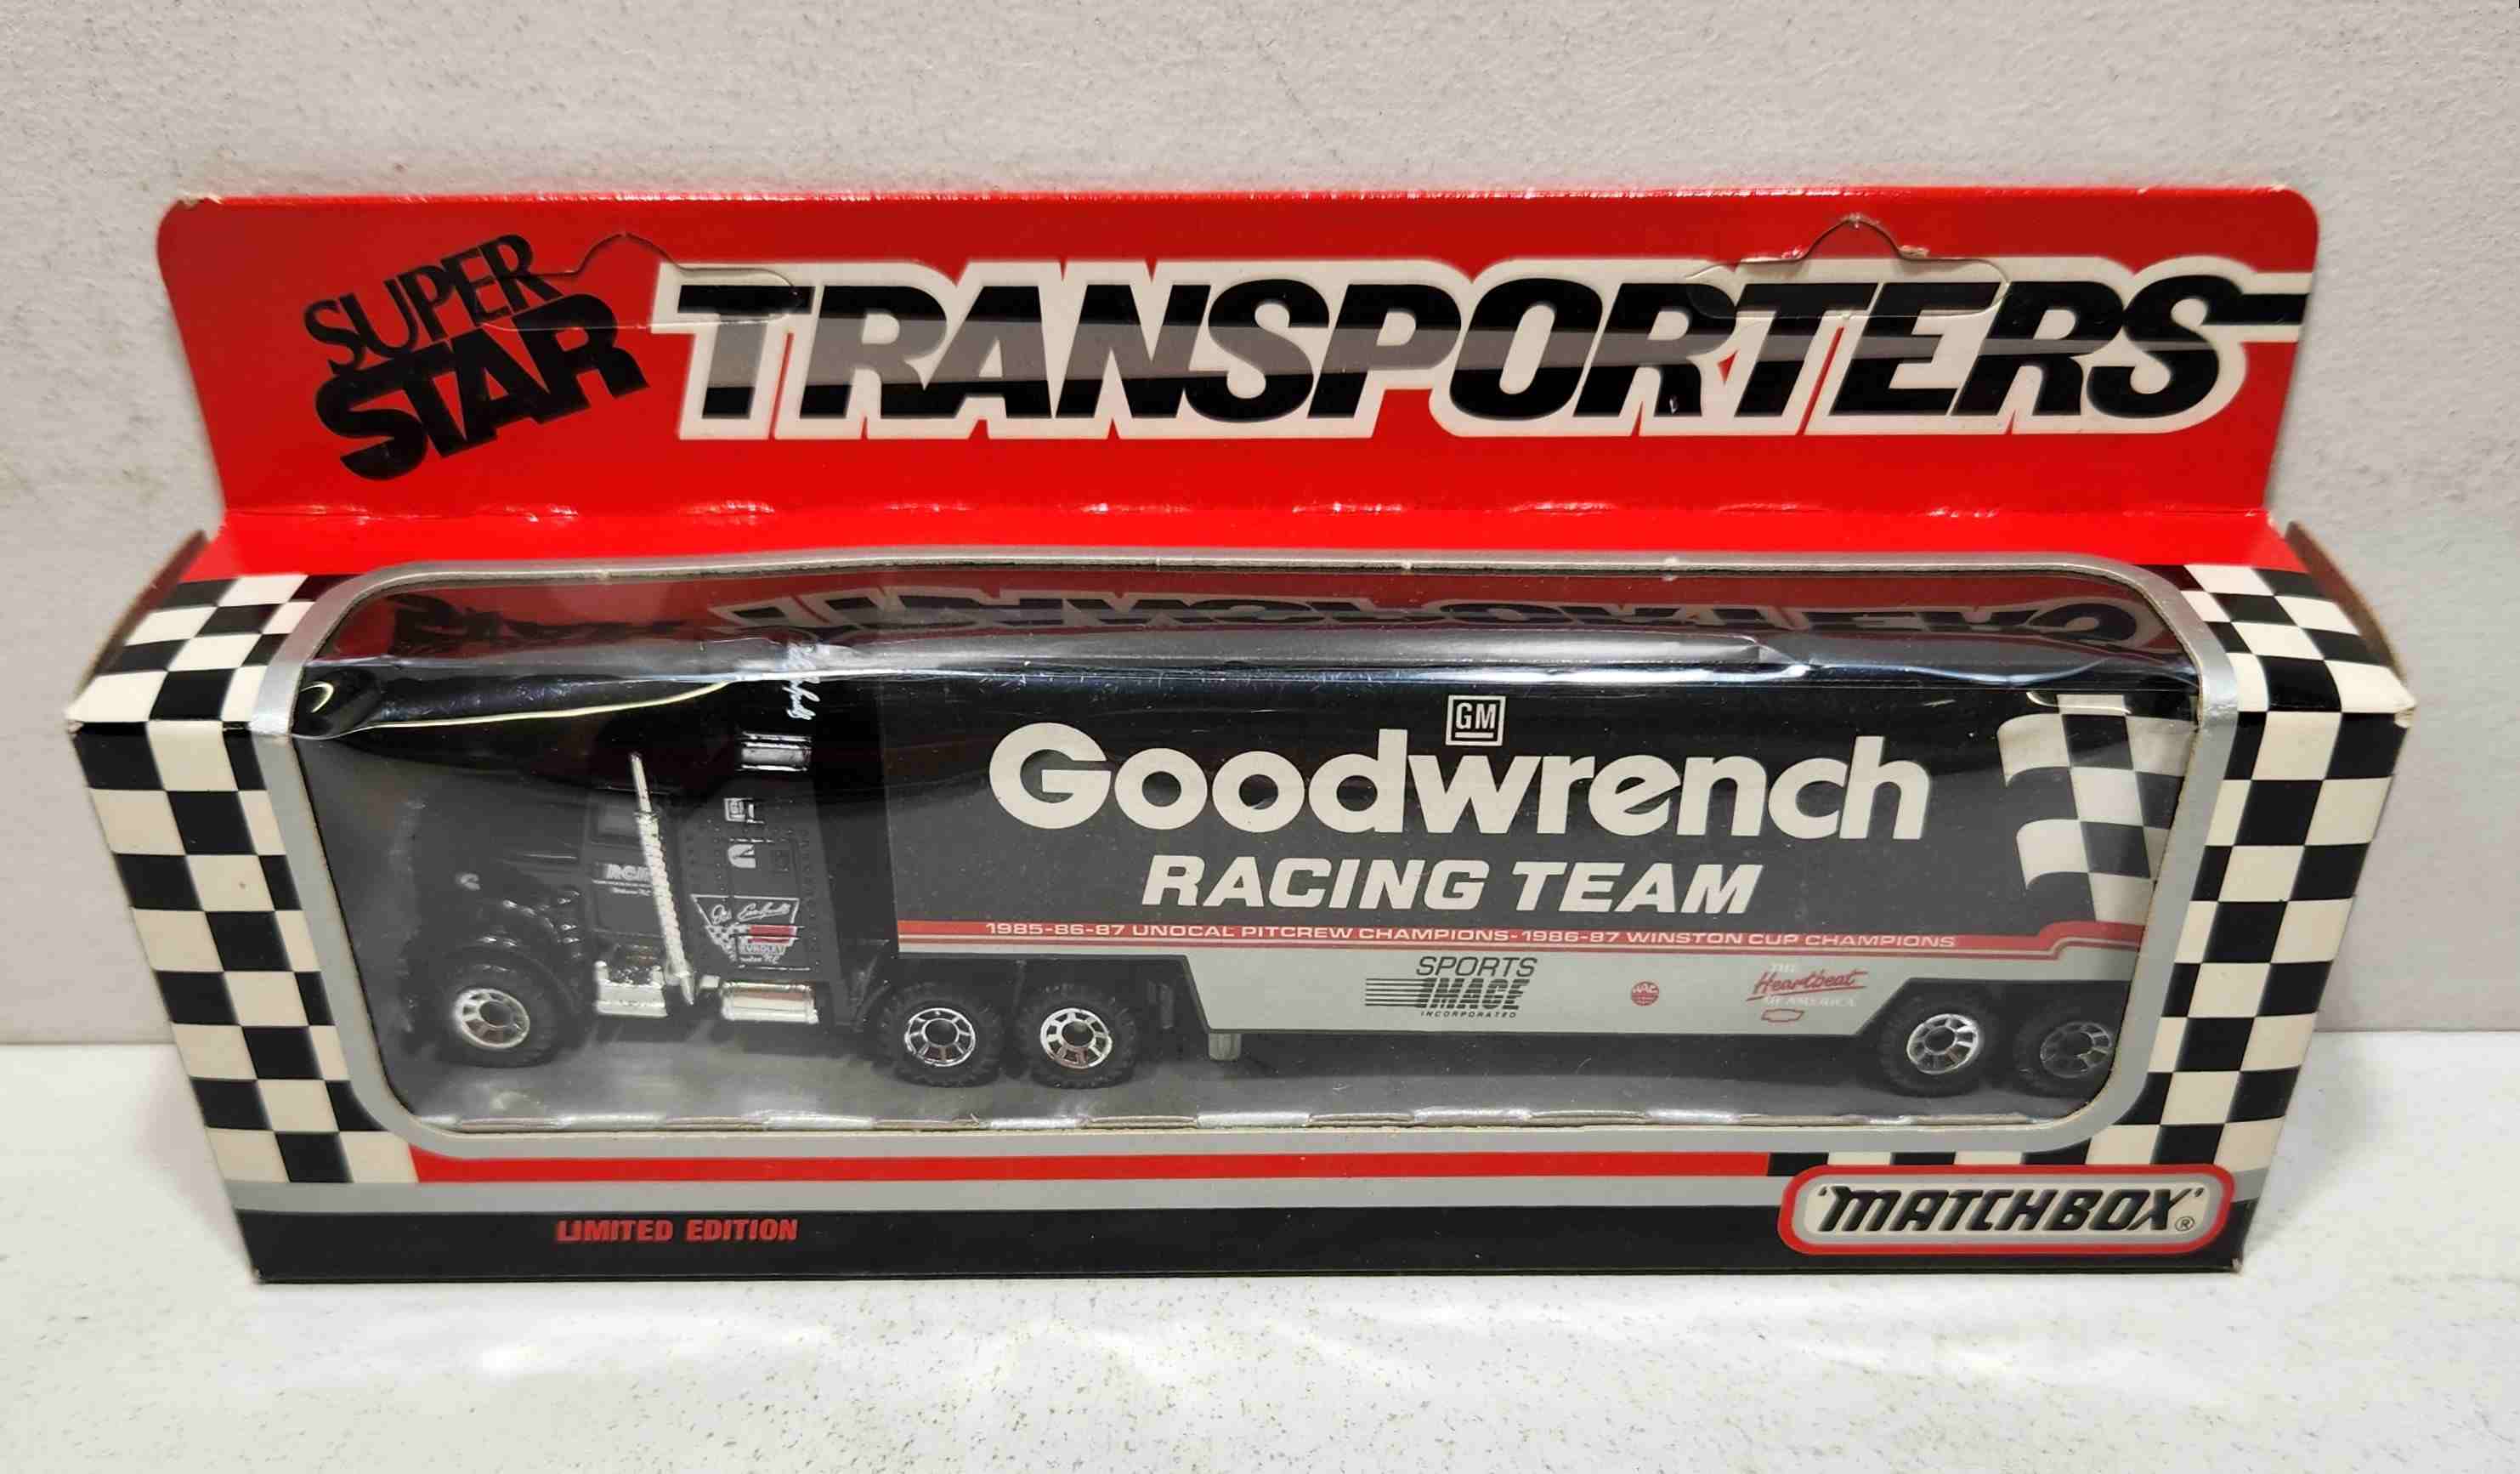 1993 Dale Earnhardt 1/87th Goodwrench Transporter